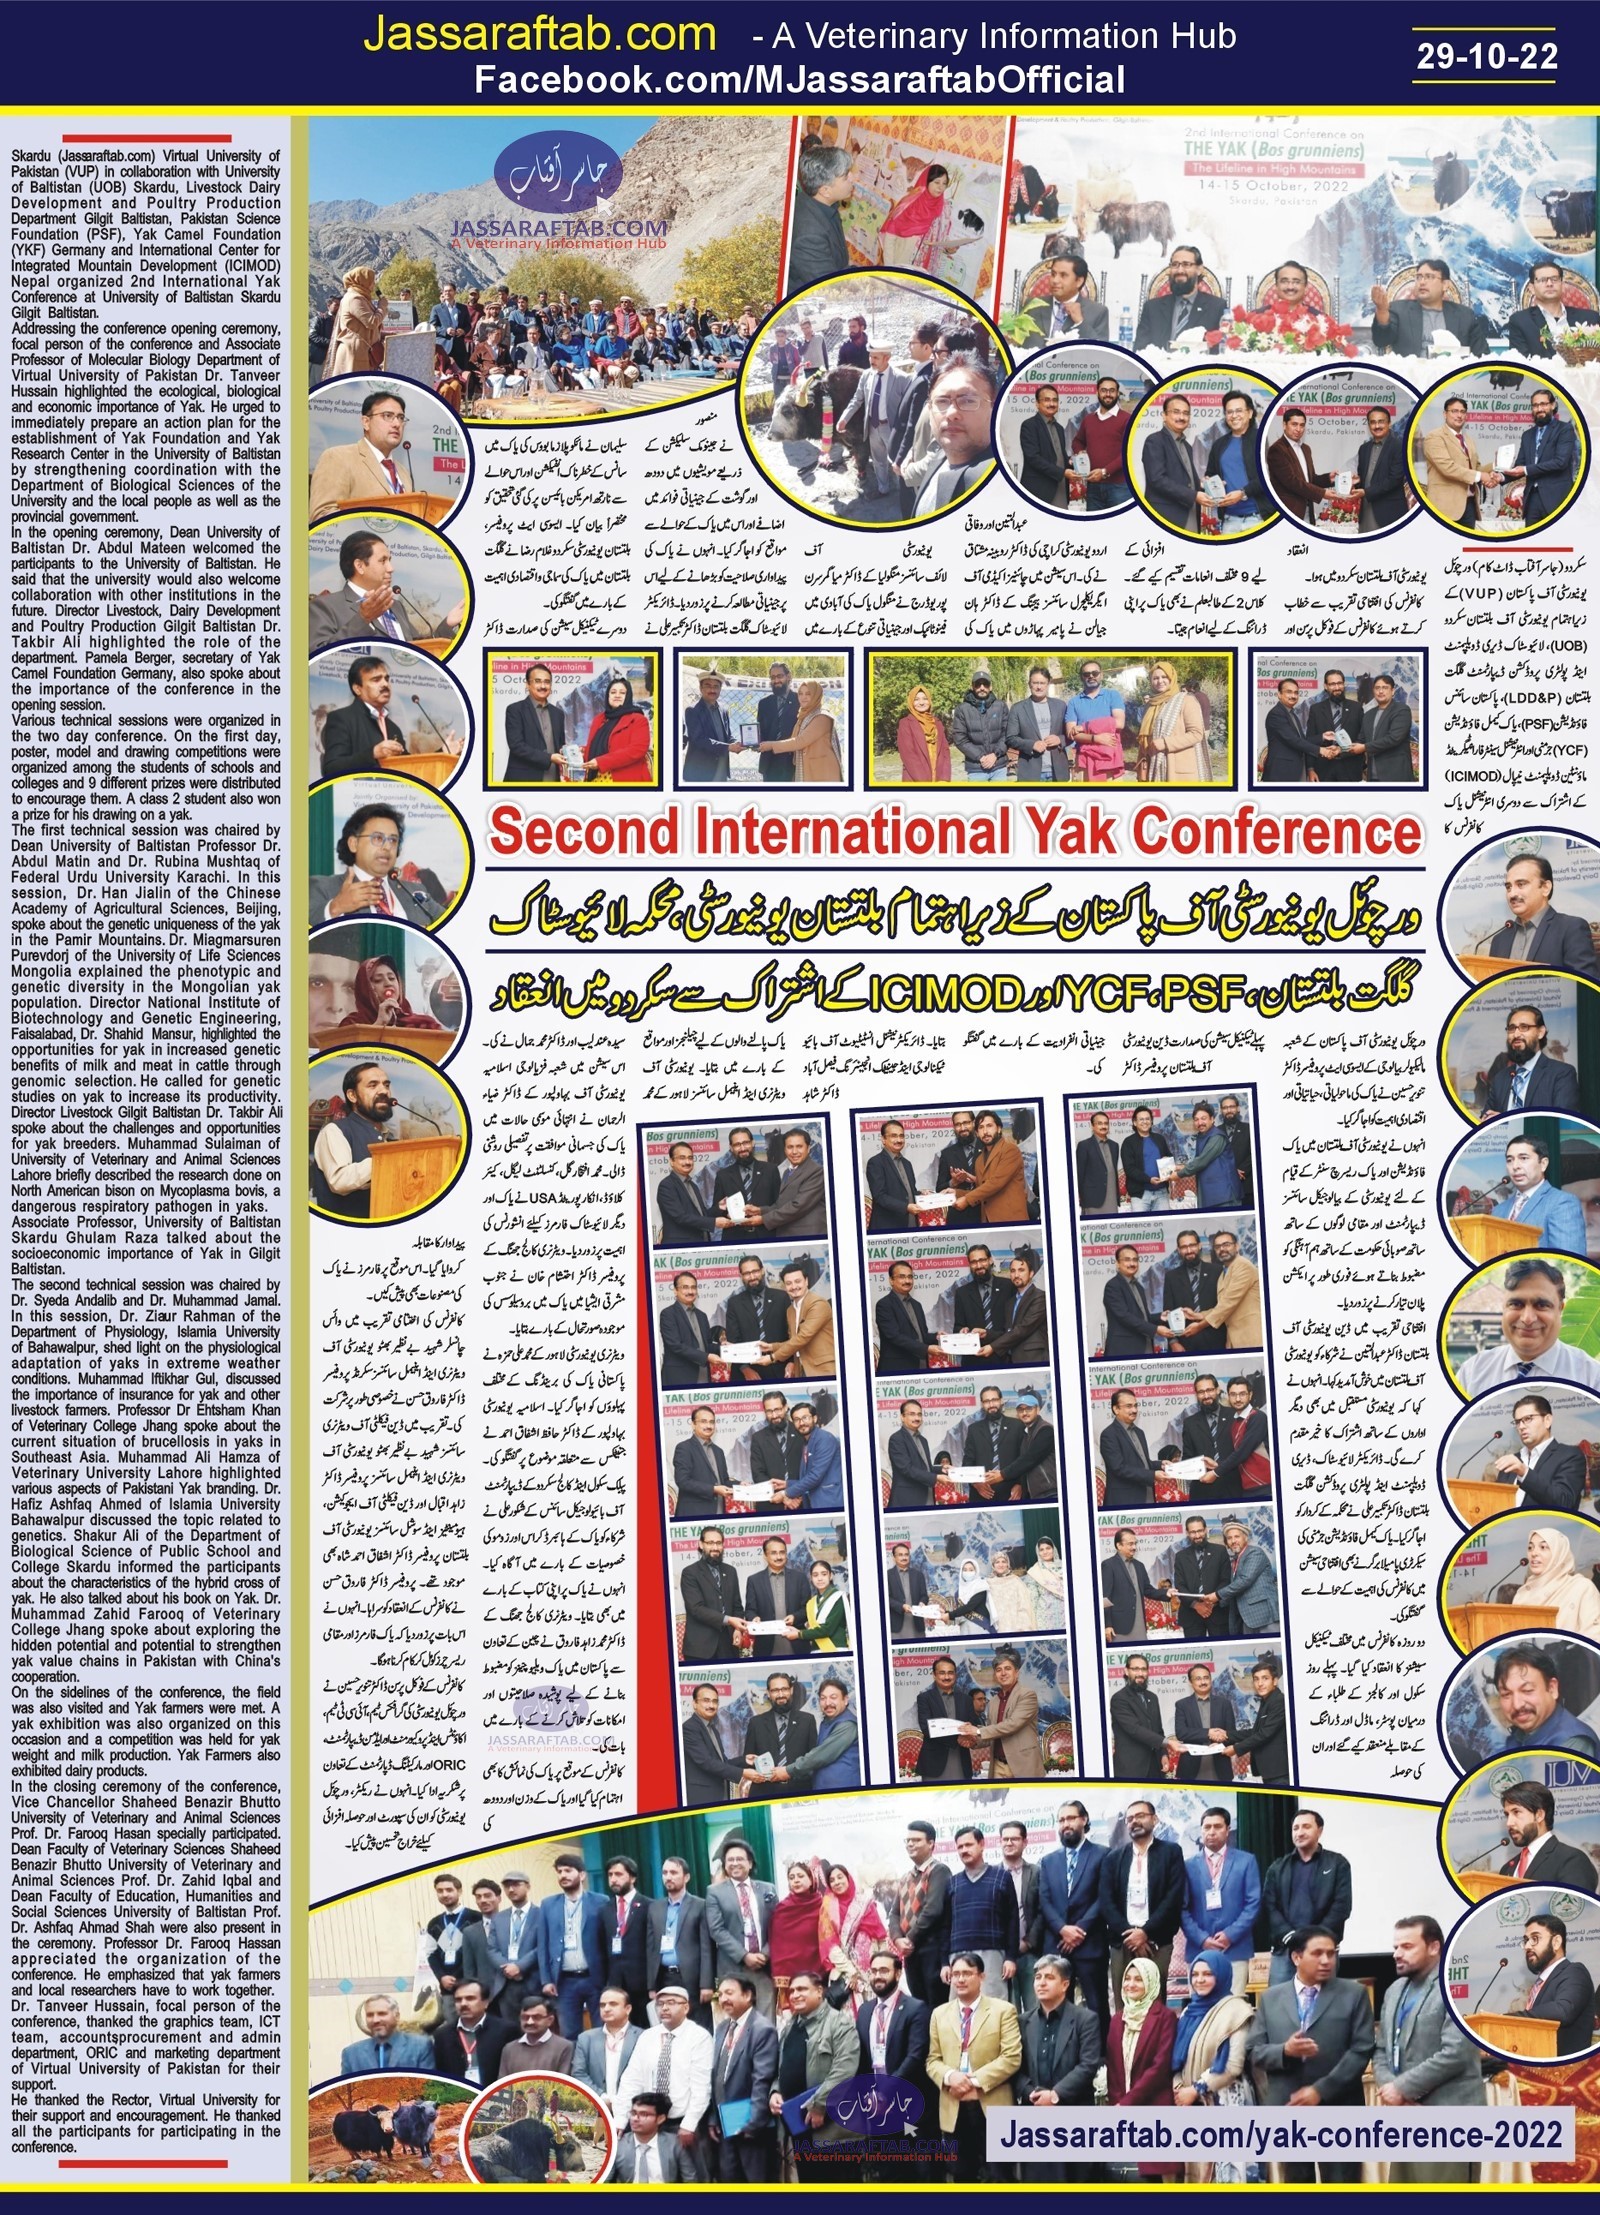 Second International Yak Conference held at University of Baltistan Skardu | Experts presented Yak Research |